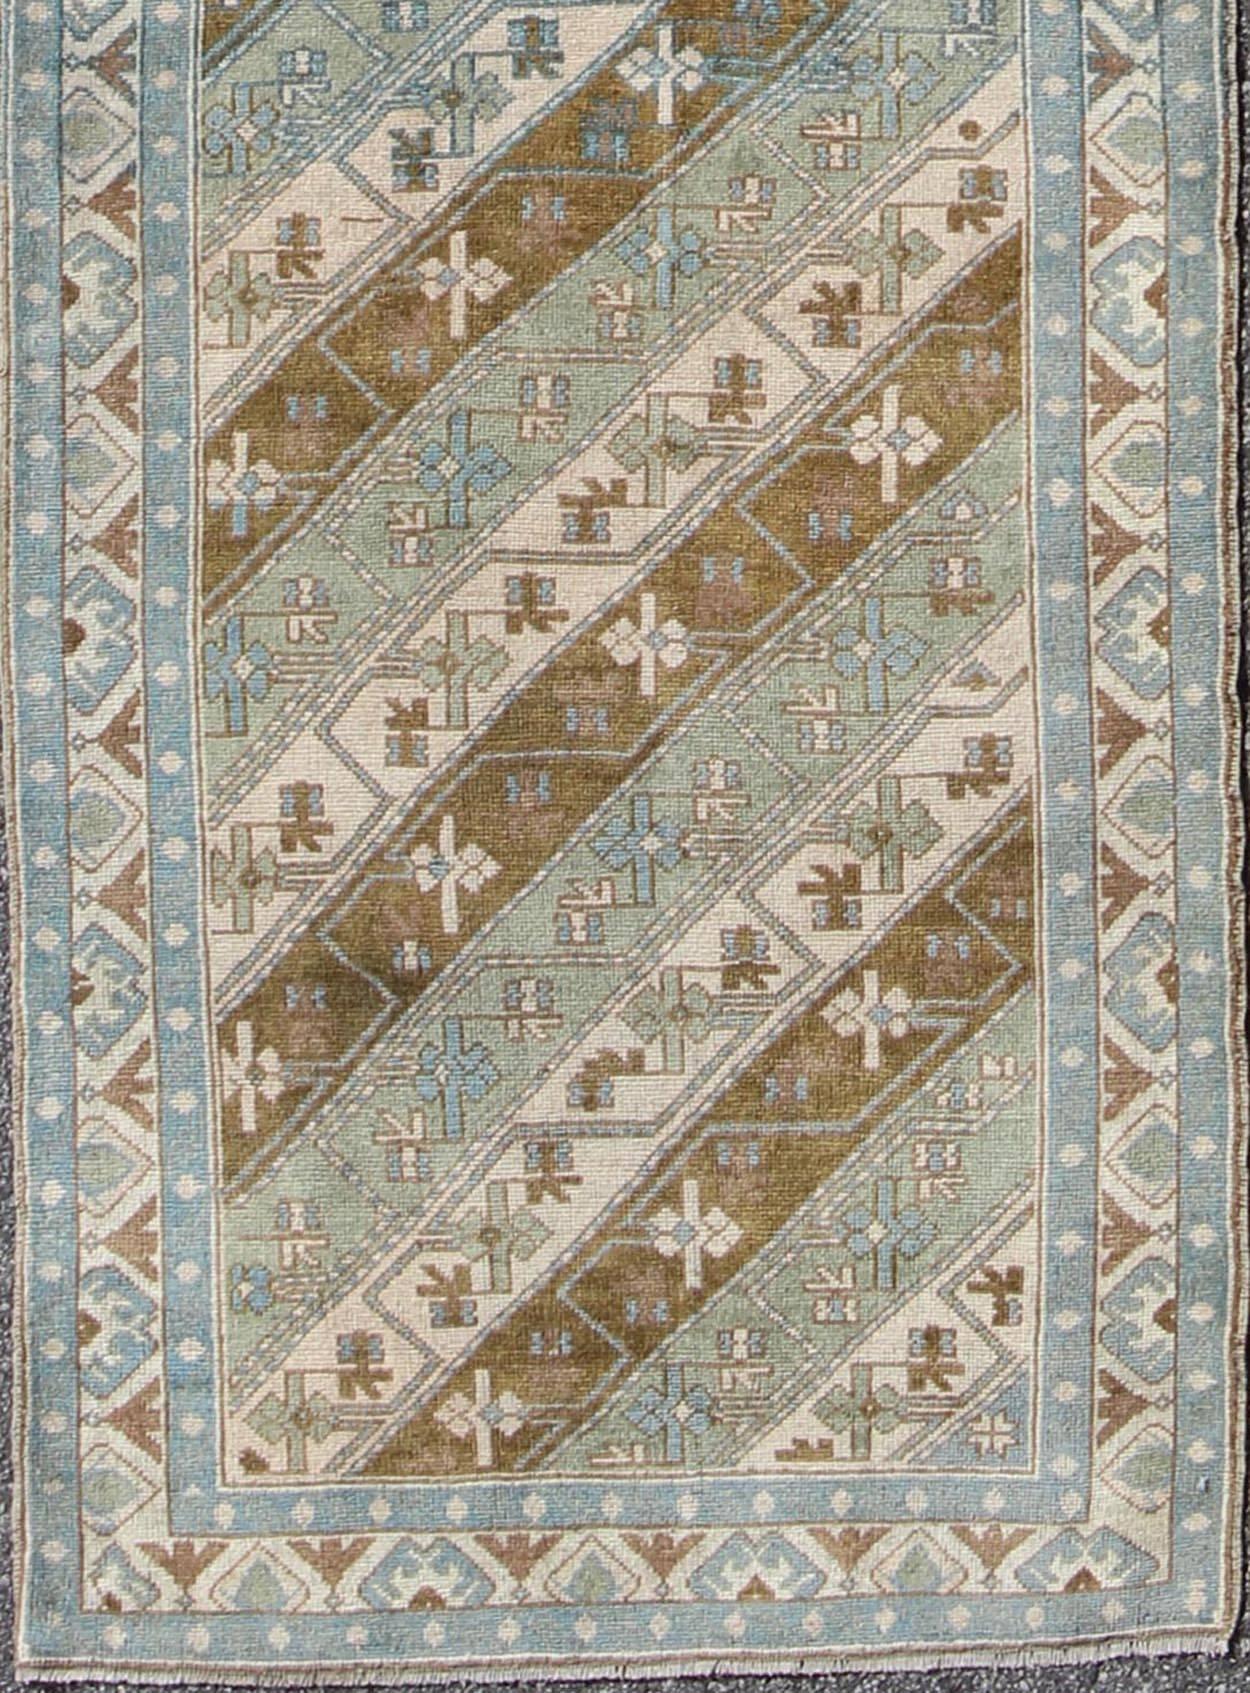 This striking Turkish Oushak rug features a bold collection of geometric motifs and colorful small flowers that combine to form a contemporary and exceptionally graphic repeating pattern. The border composition features a robust pattern of green,